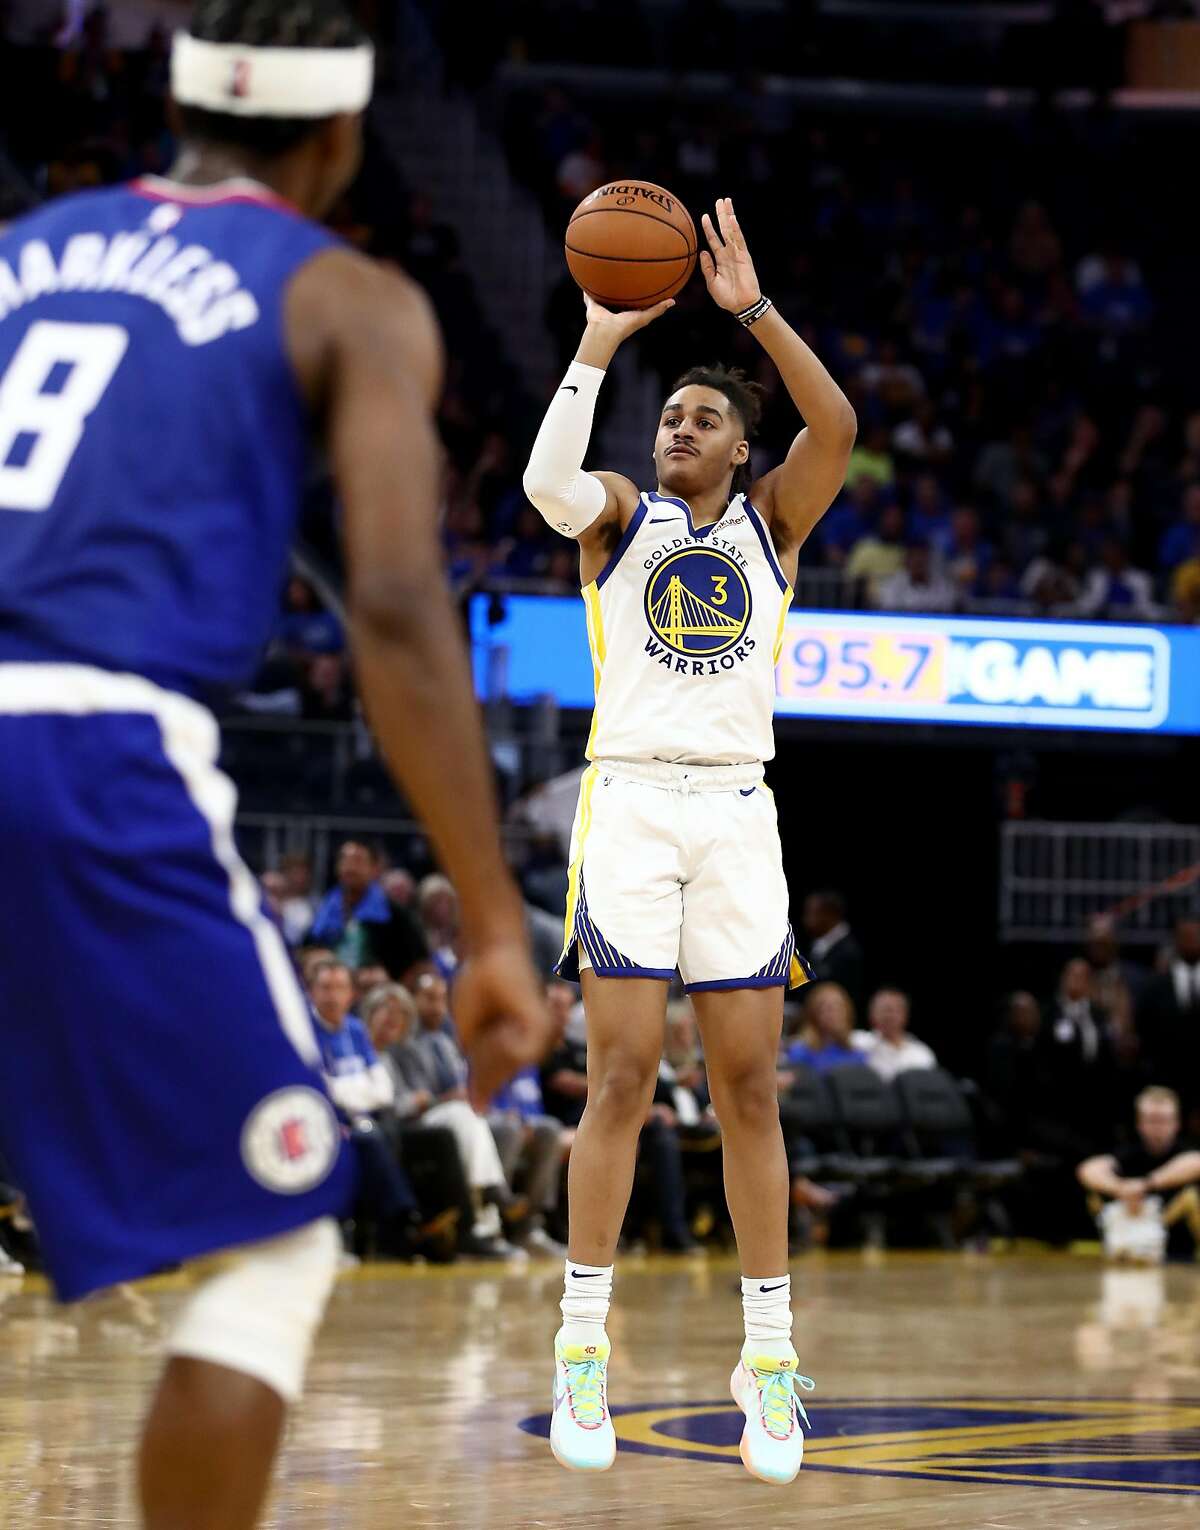 SAN FRANCISCO, CALIFORNIA - OCTOBER 24: Jordan Poole #3 of the Golden State Warriors in action against the LA Clippers at Chase Center on October 24, 2019 in San Francisco, California. NOTE TO USER: User expressly acknowledges and agrees that, by downl